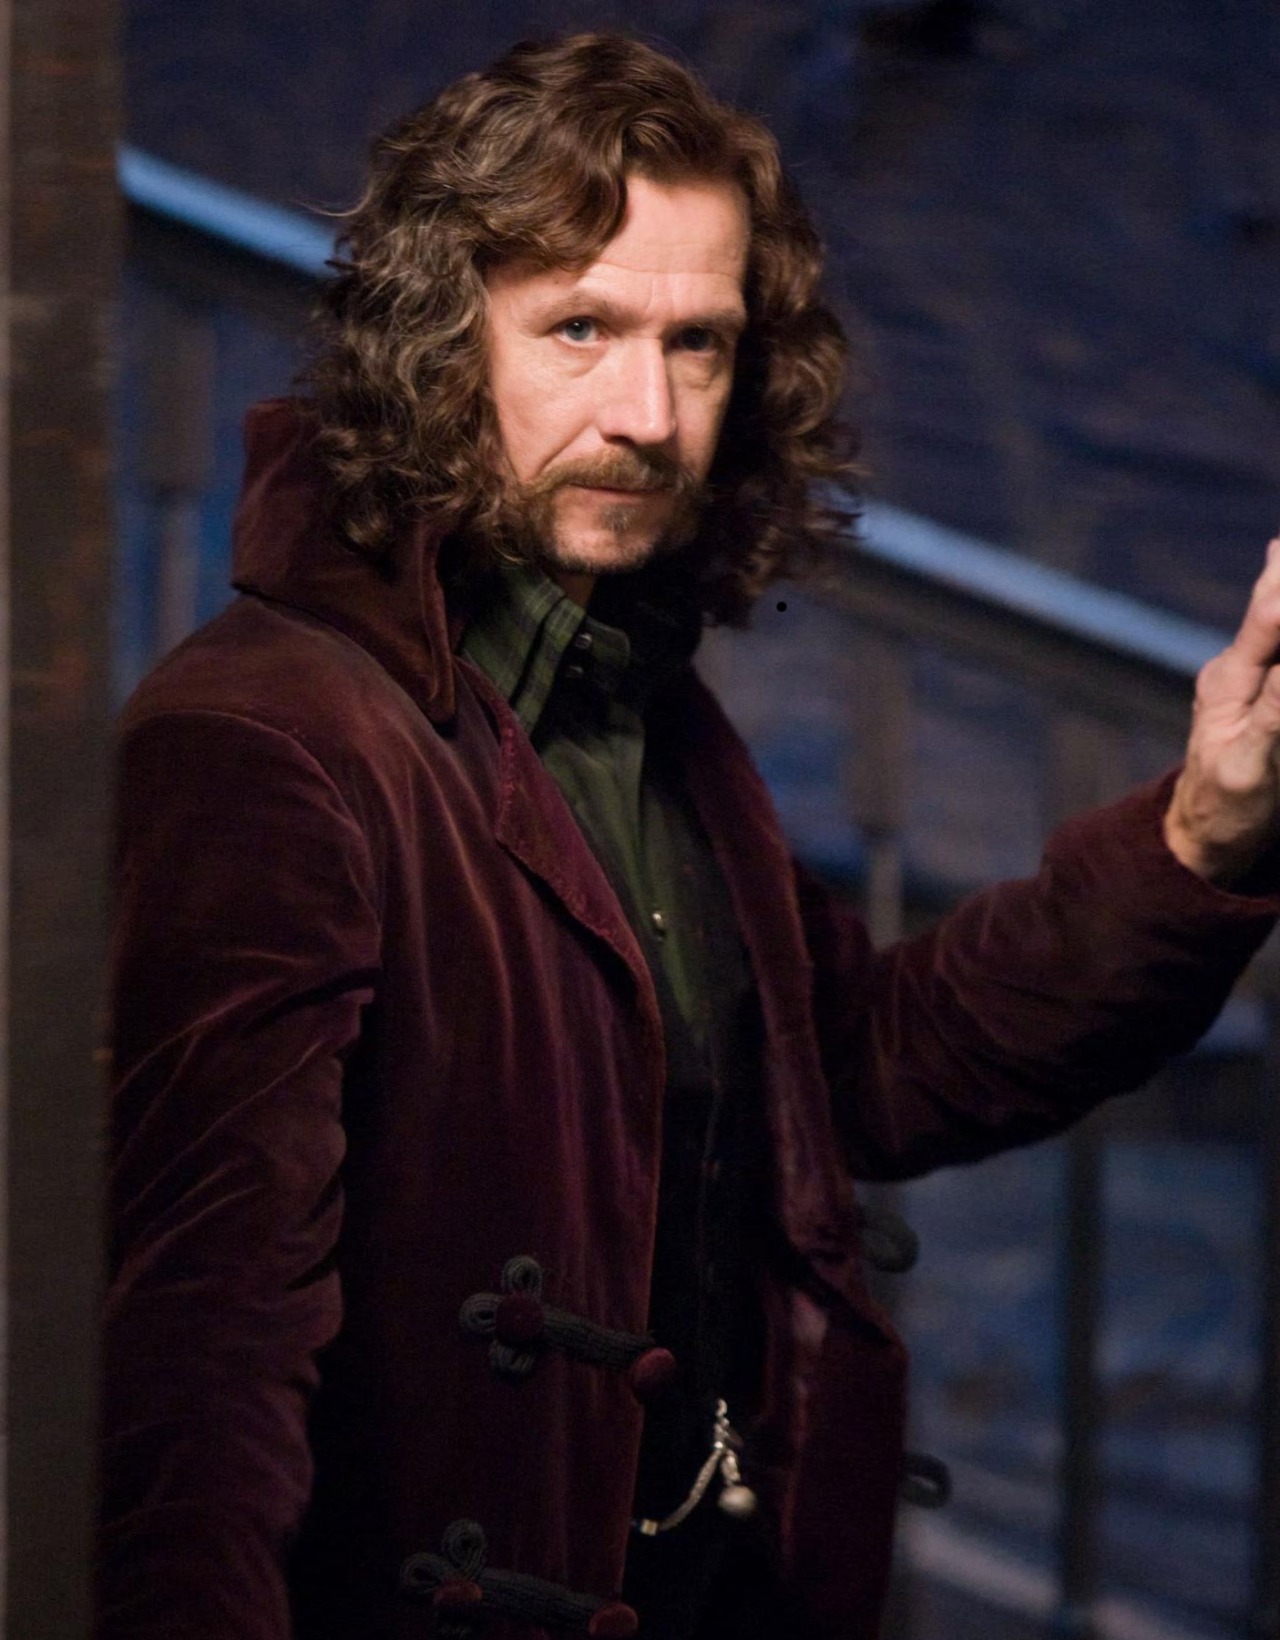 Gary Oldman as Sirius Black - Harry Potter Another of my guilty man crushes&hellip;.